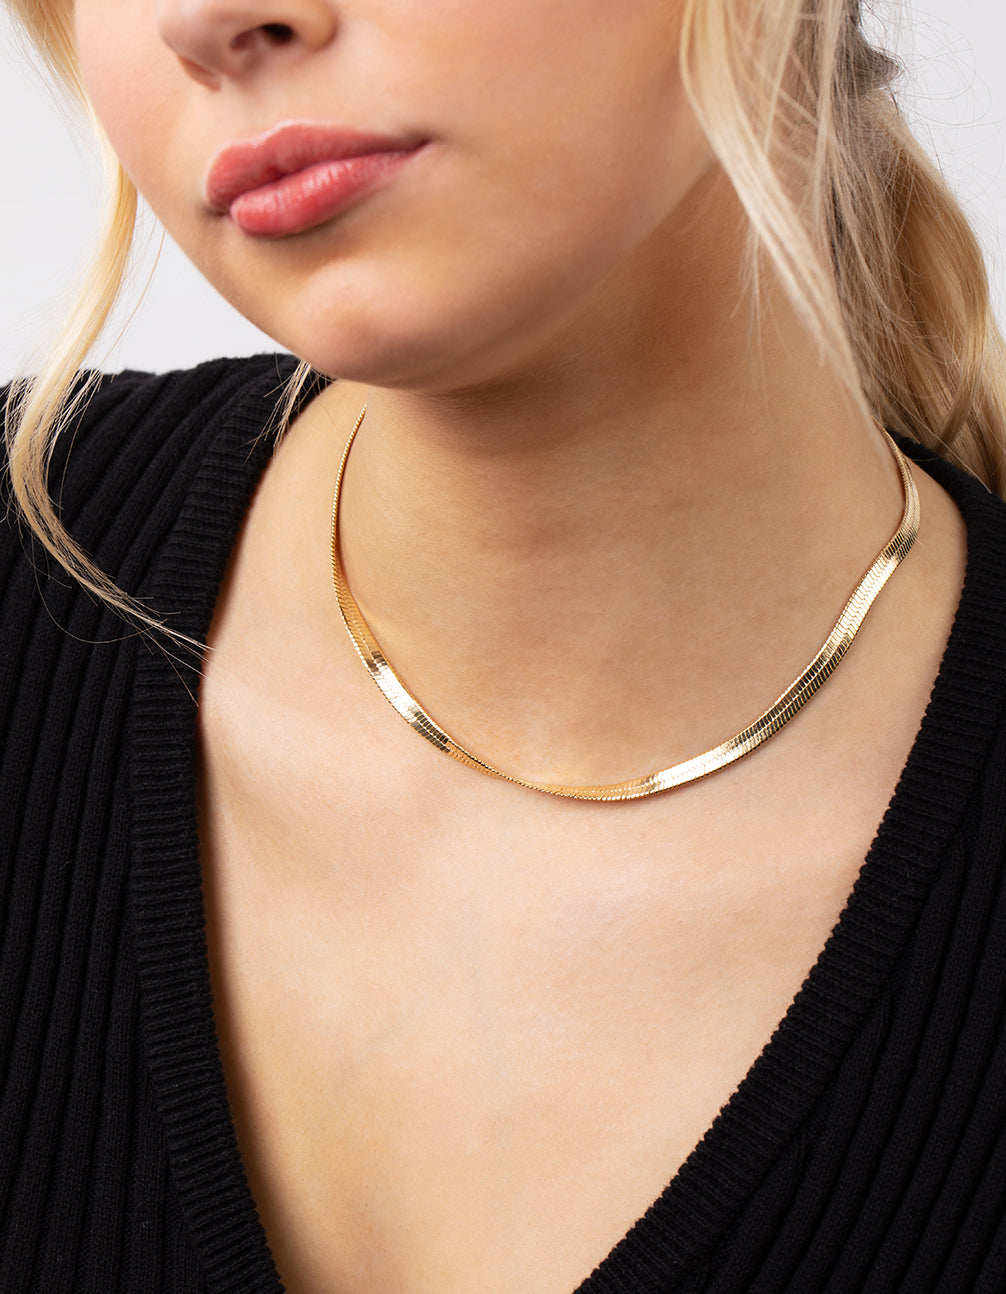 Gold Snake Chain, Thick Chain Choker, Thick Gold Necklace, Flat Chain  Necklace, Gold Herringbone Chain, Gold Chain, Thick Necklace in Gold - Etsy  | Collane a catena, Collane, Collana in oro